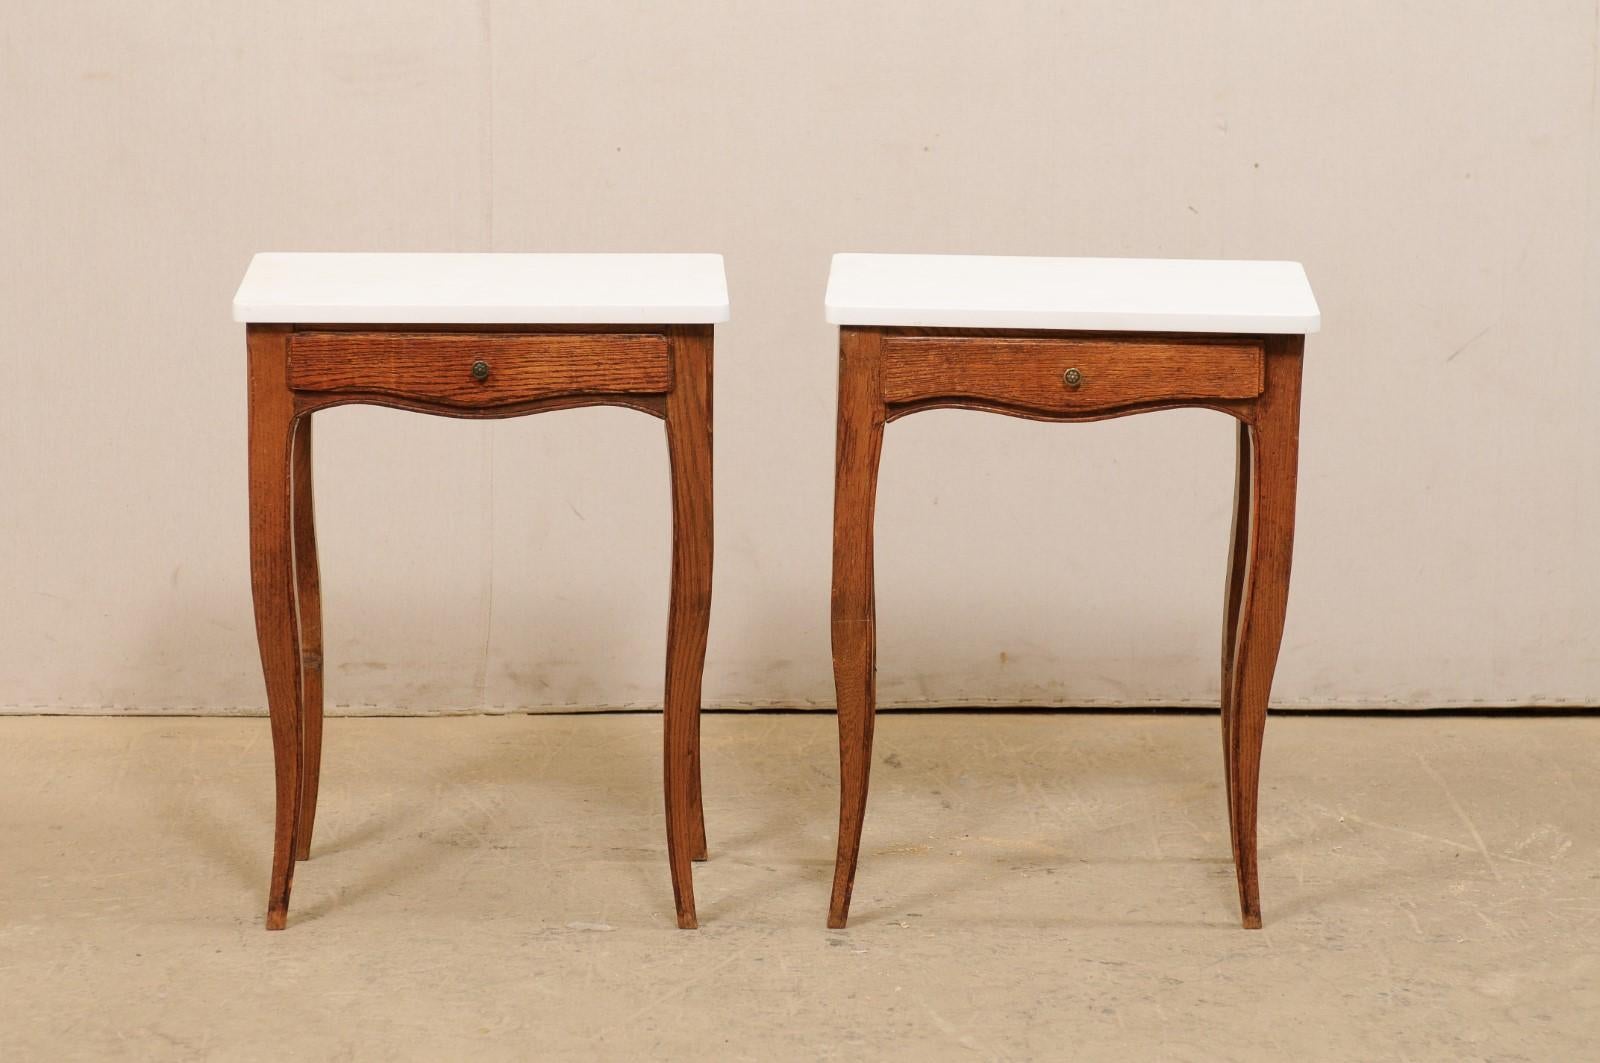 1920s end tables